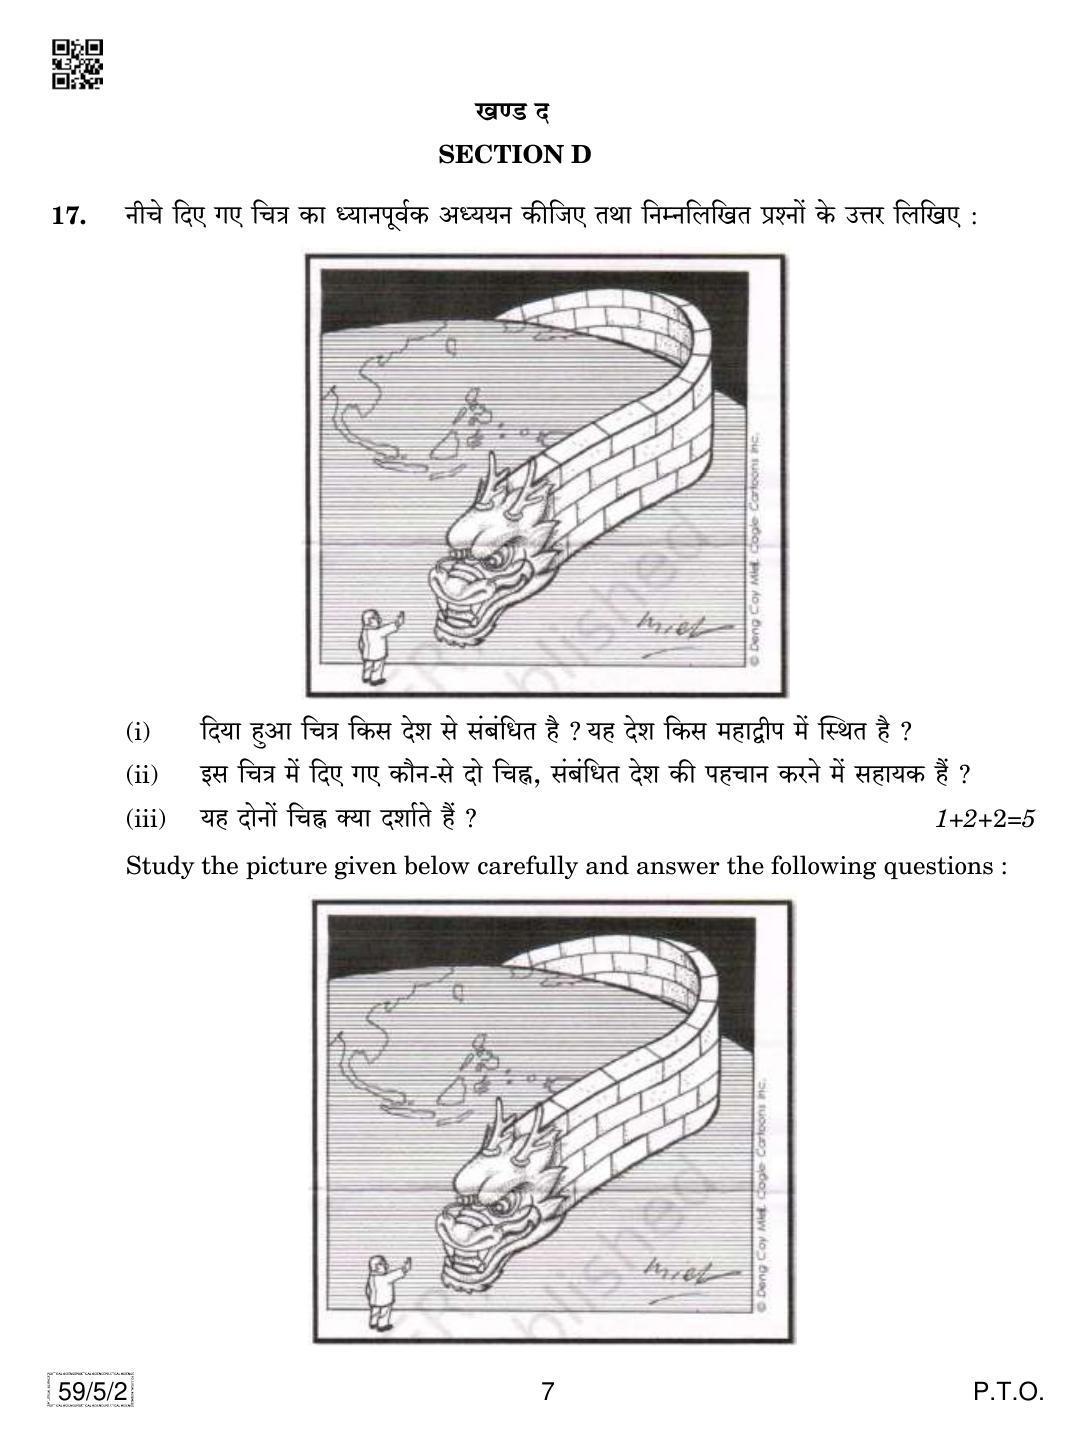 CBSE Class 12 59-5-2 Political Science 2019 Question Paper - Page 7